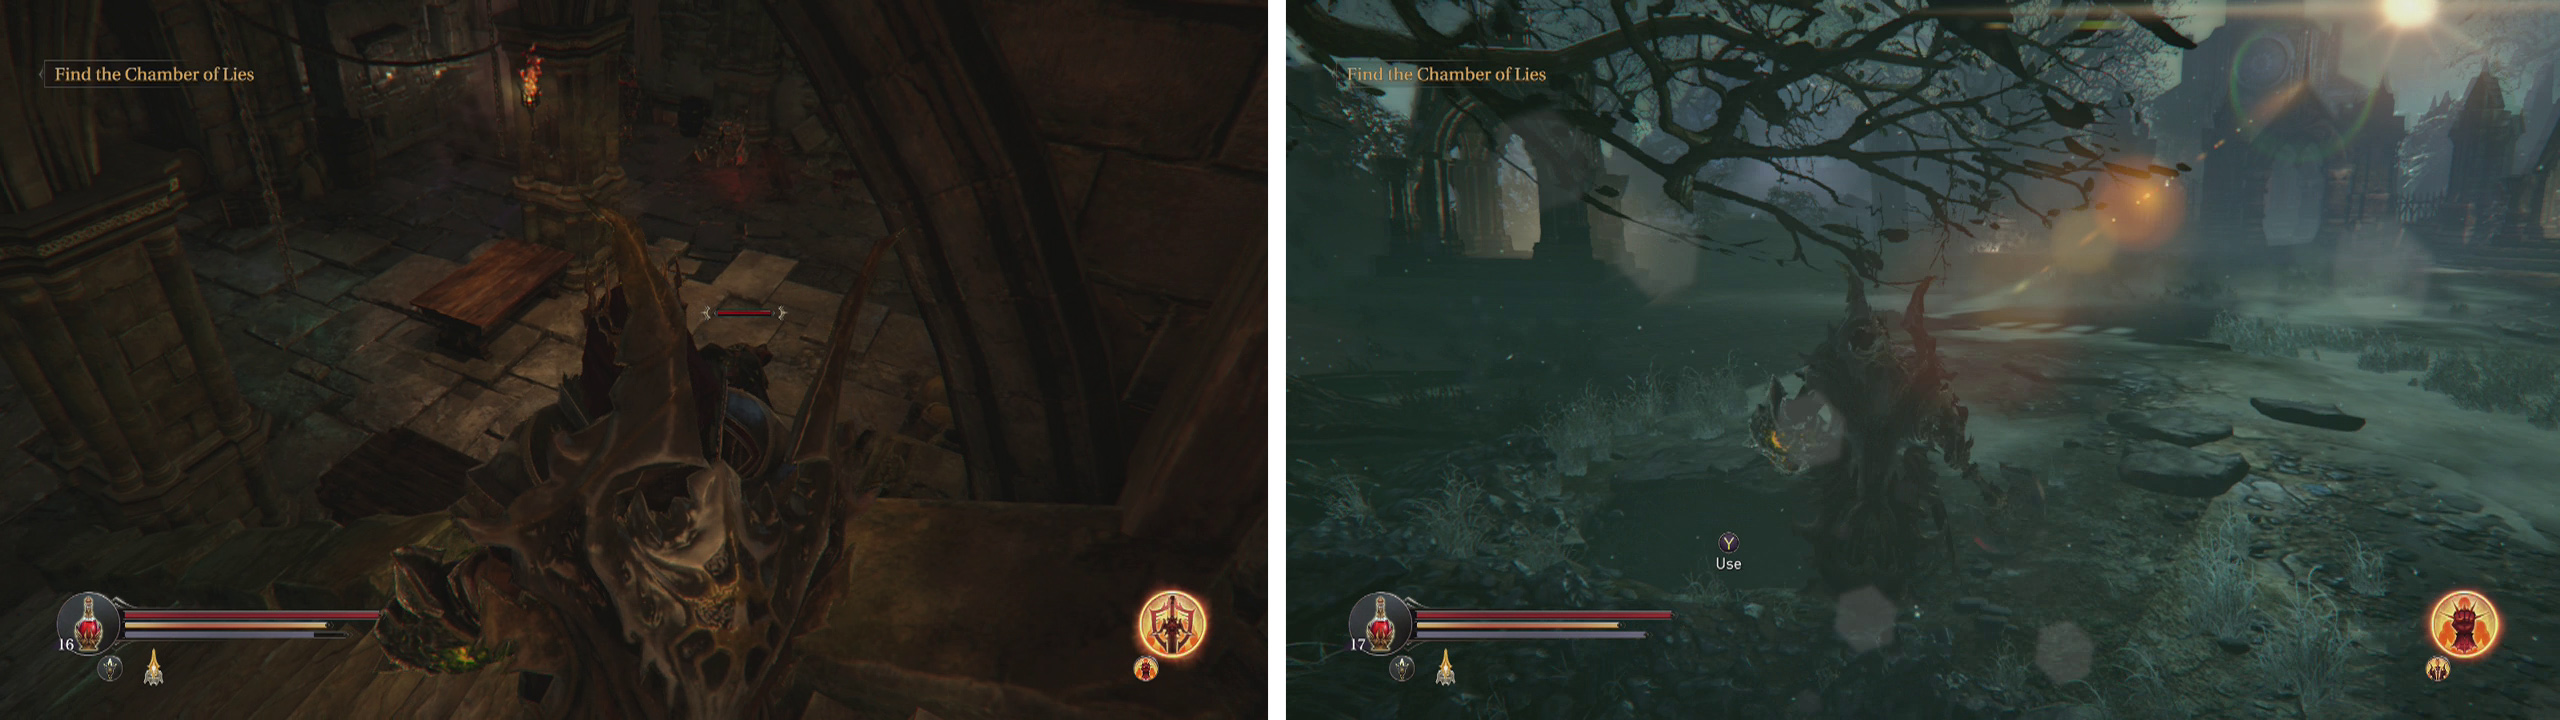 Grab the Cursed Sword from the Old Quarters in the Citadel (left). Place the sword into the hole in the Graveyard (right) to fight a ghost for a reward.